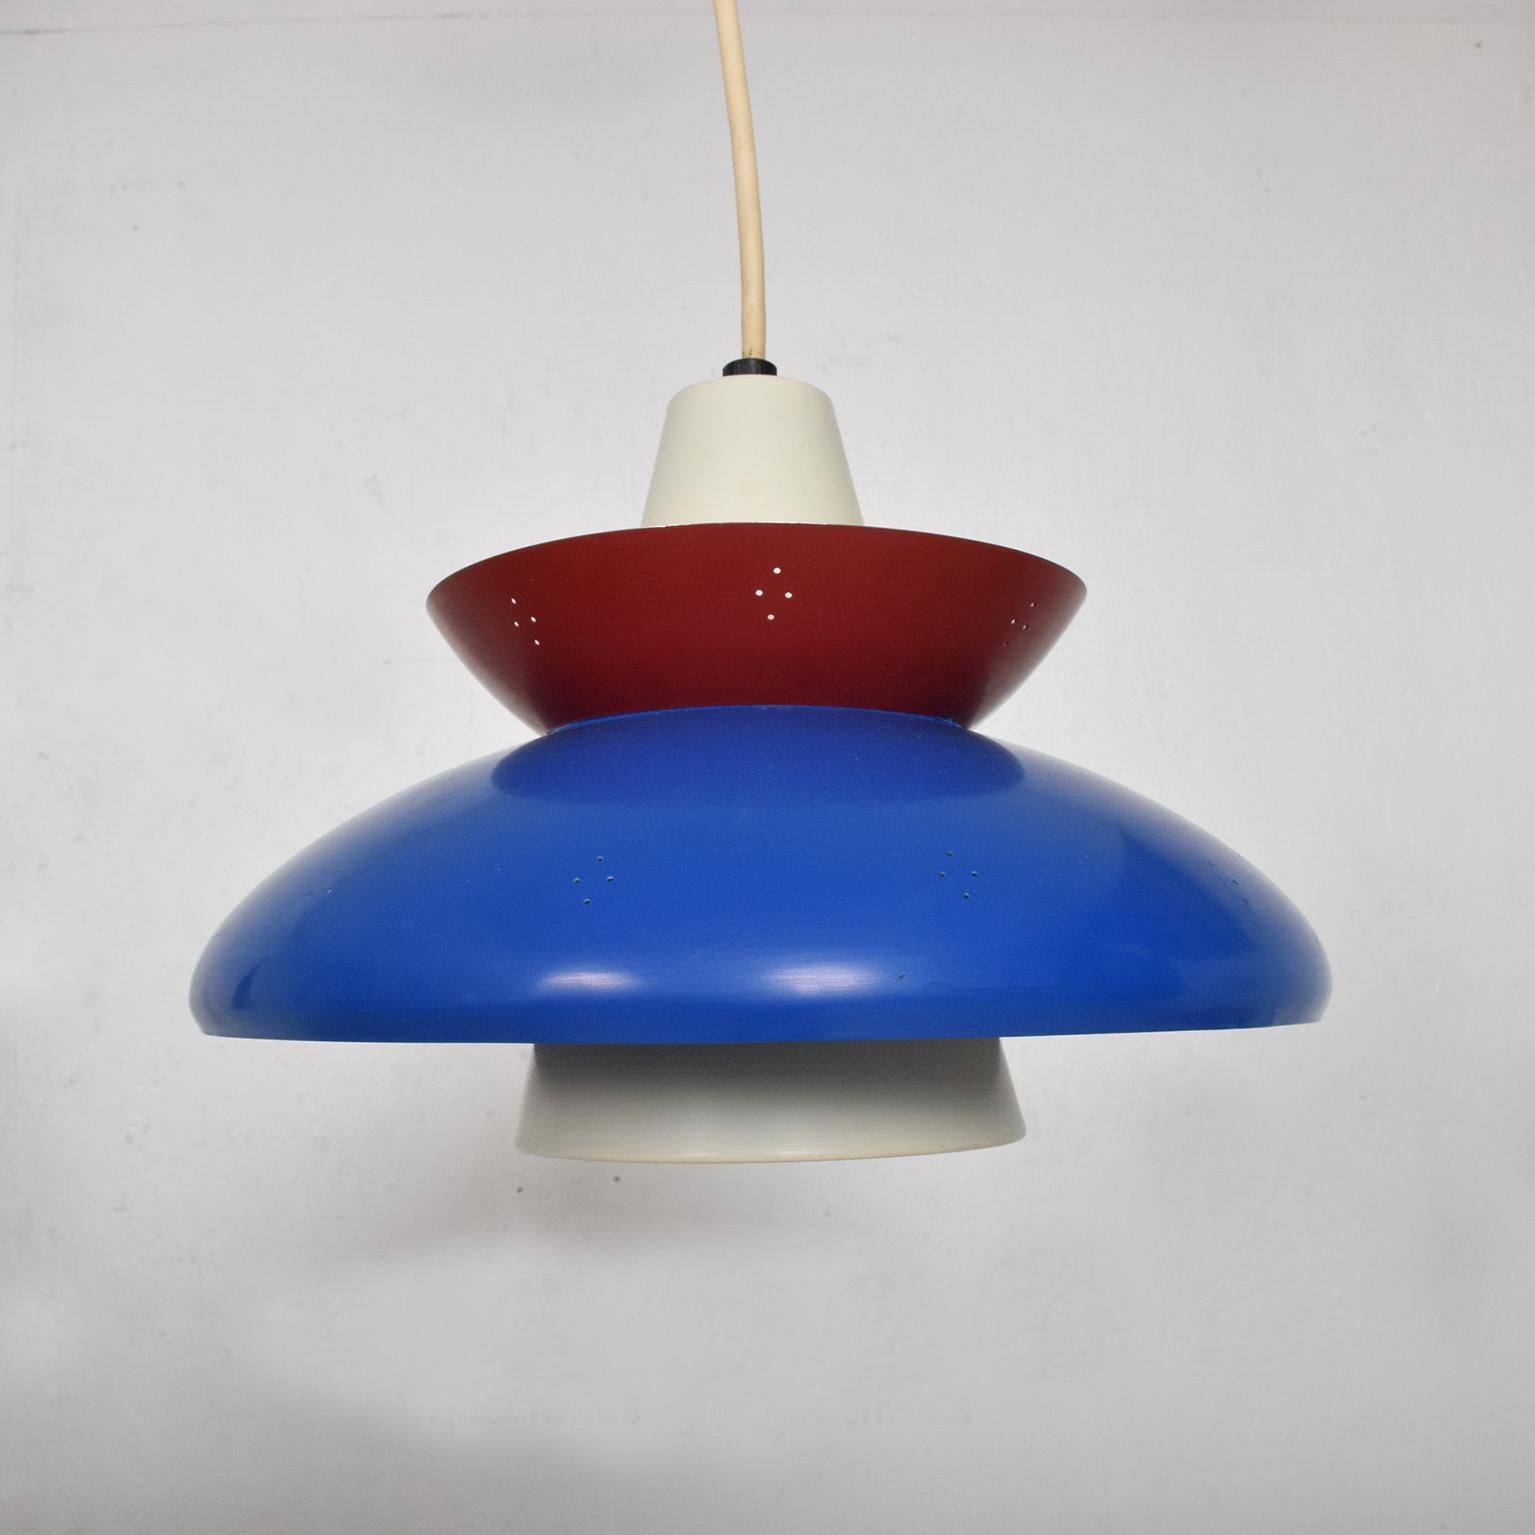 1950s USA Patriotic Pendant Light Mid-Century Modern Red White and Blue Lamp 1